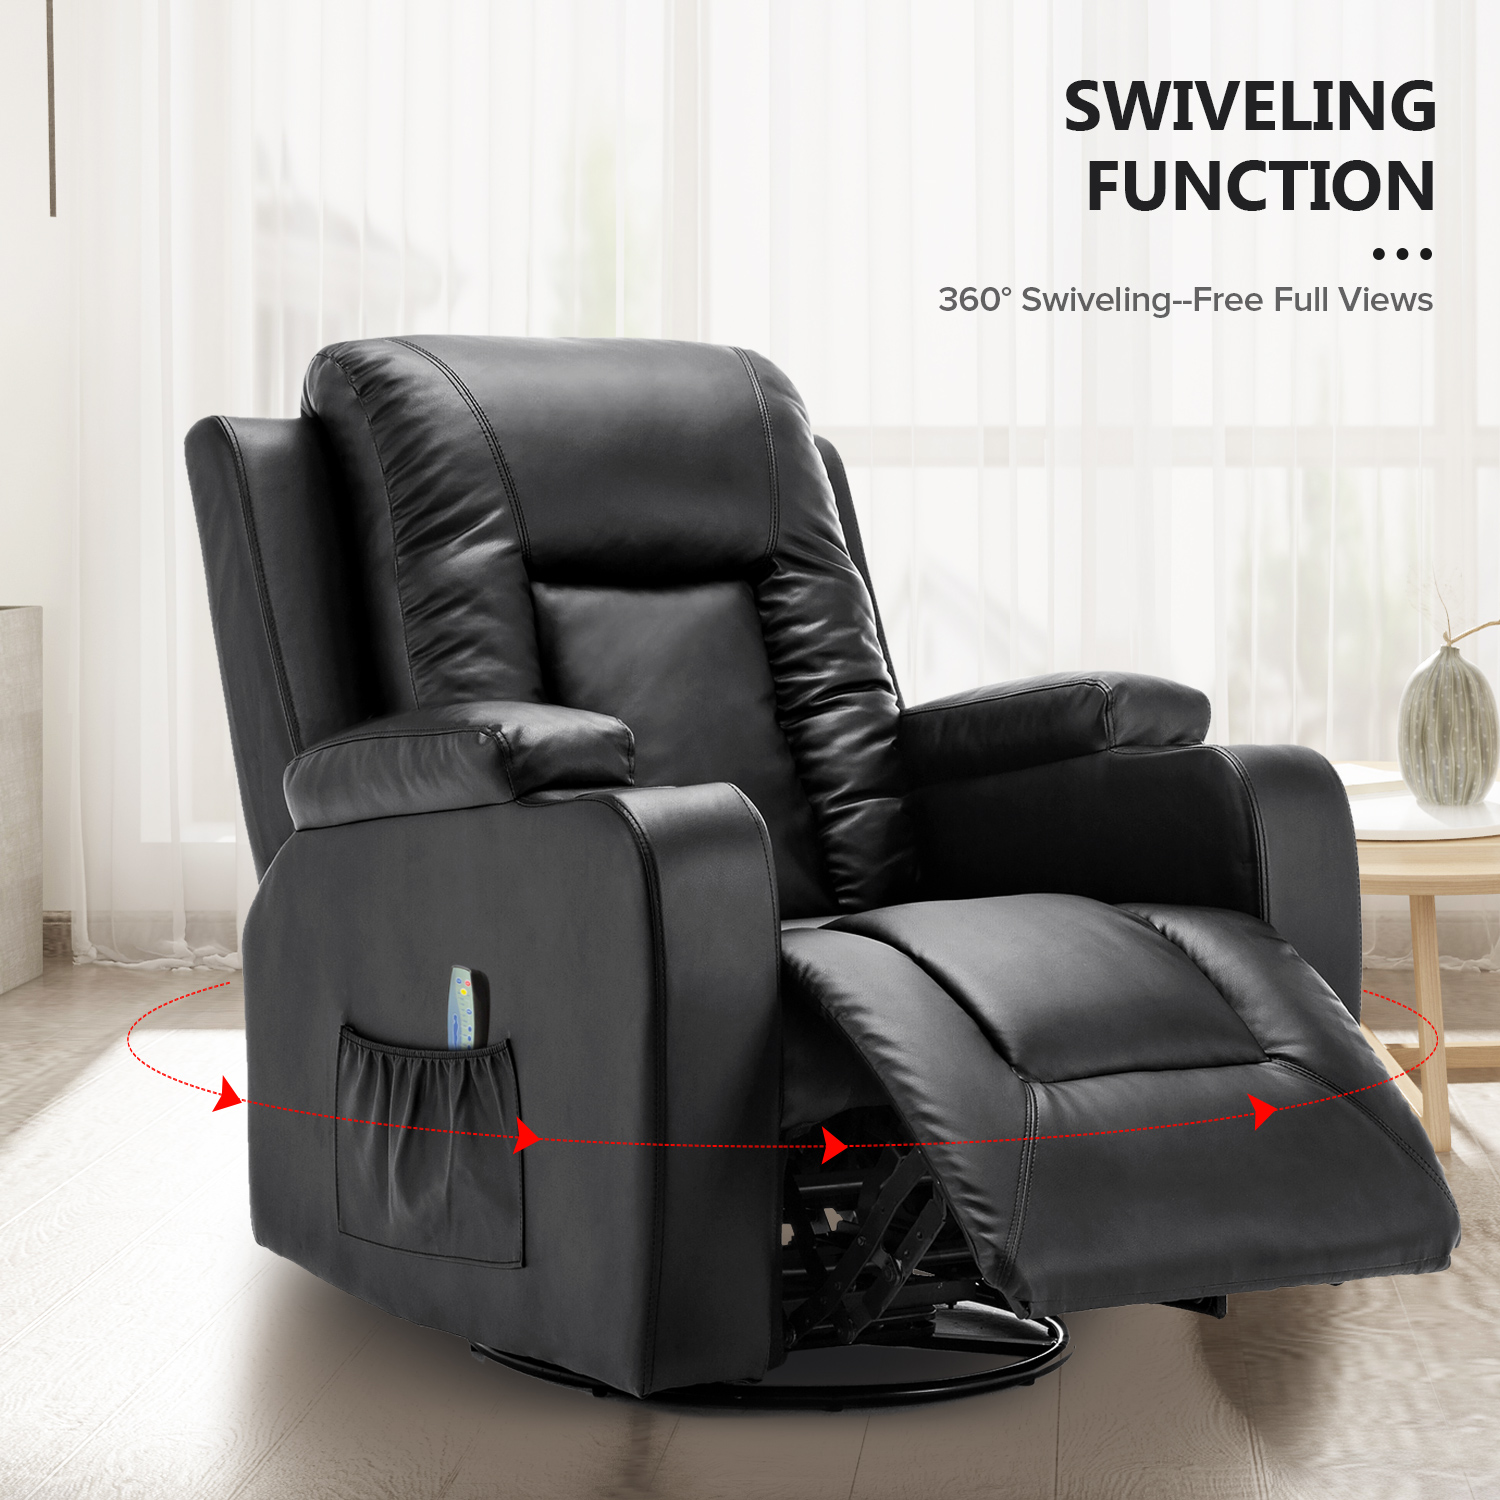 COMHOMA Swivel Rocker Recliner Chair PU Leather Rocking Sofa with Heated Massage, Black - image 4 of 8